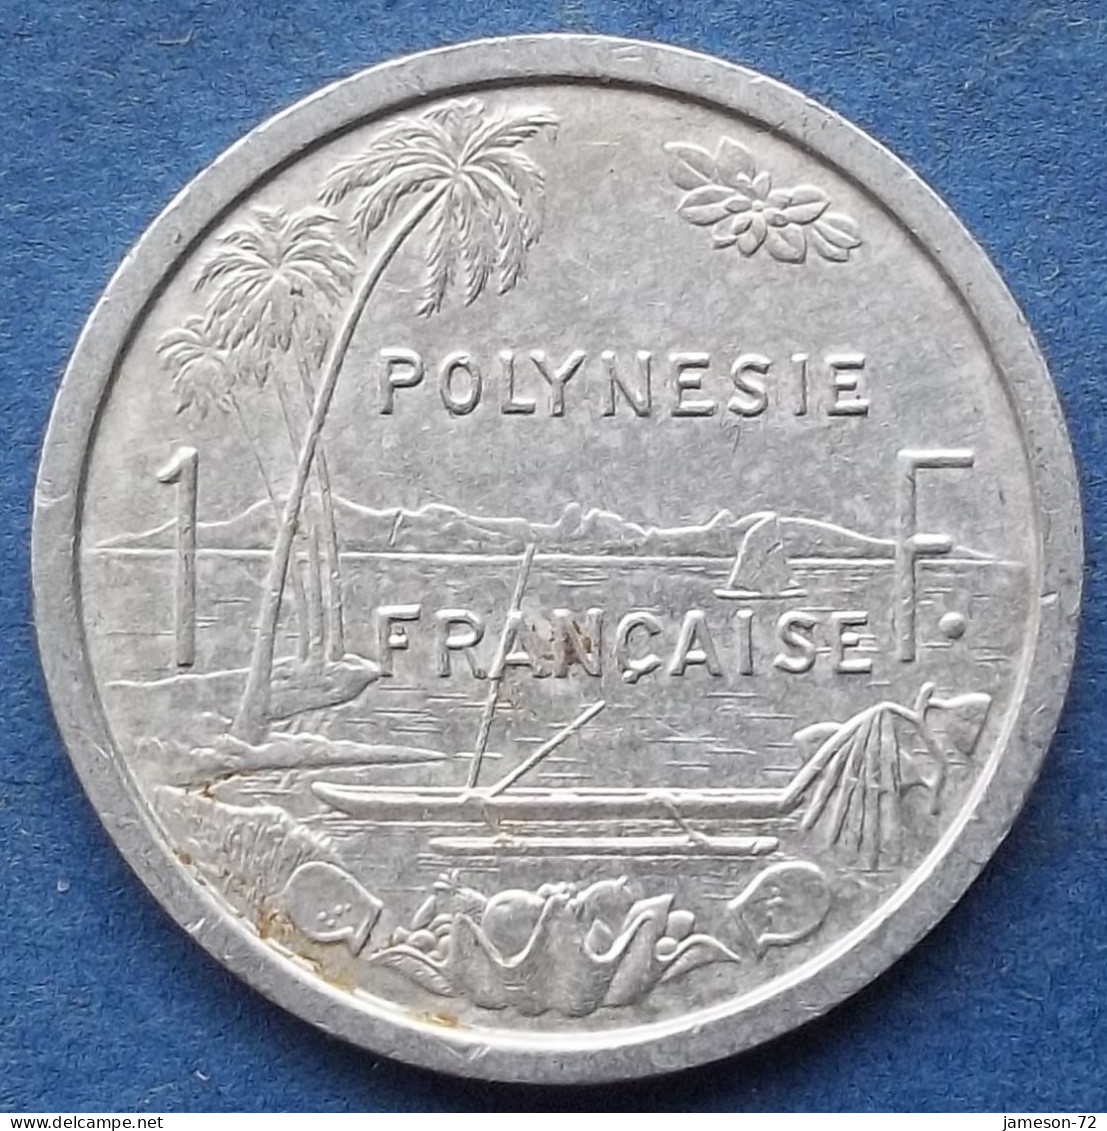 FRENCH POLYNESIA - 1 Franc 1984 KM# 11 French Overseas Territory - Edelweiss Coins - Polynésie Française